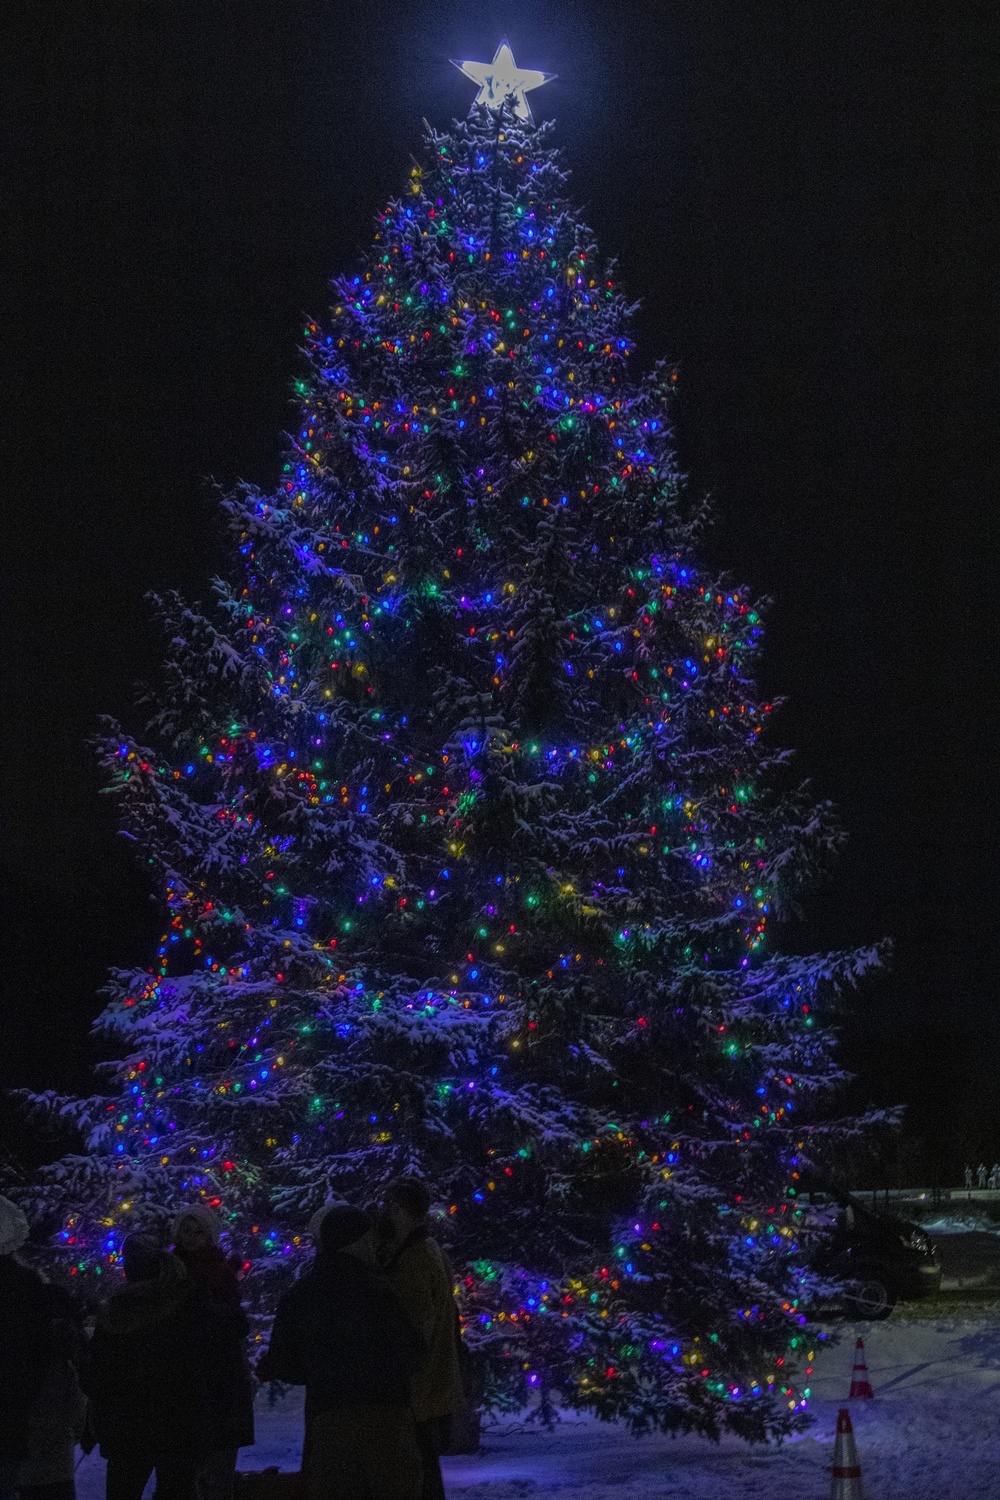 Fort Drum and the 10th Mountain Division (LI) hosts its annual Christmas tree lighting celebration